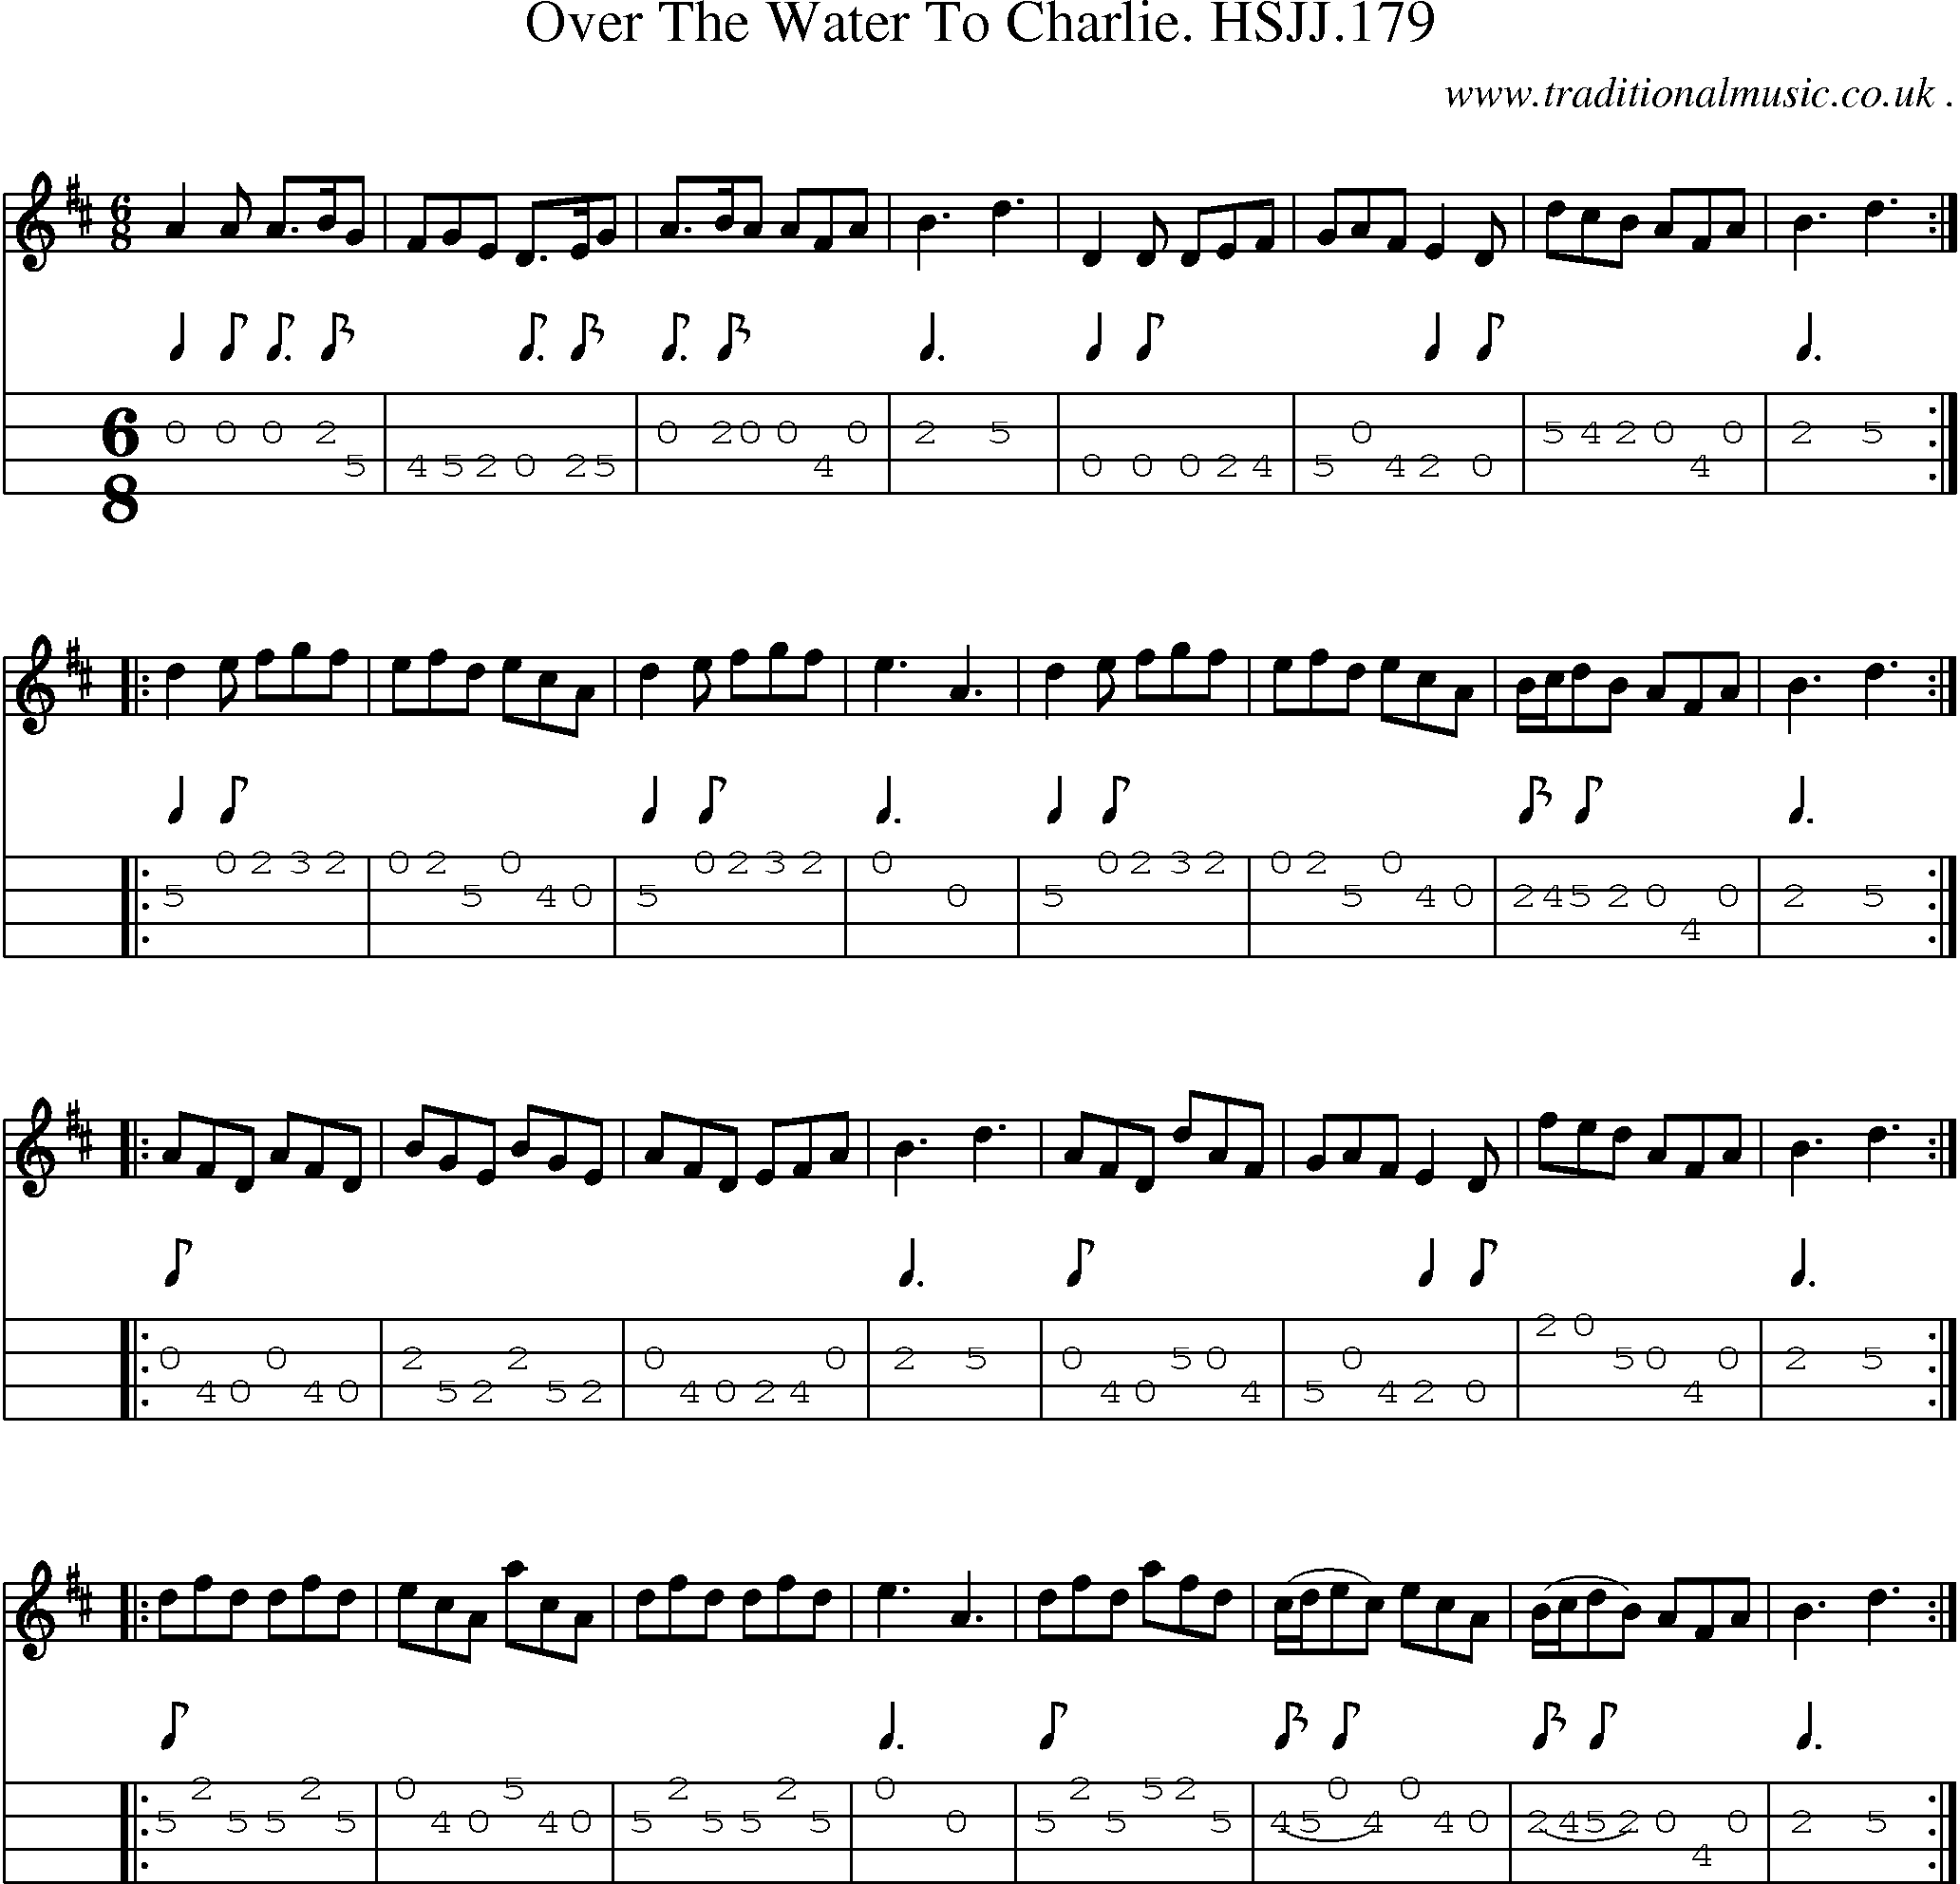 Sheet-music  score, Chords and Mandolin Tabs for Over The Water To Charlie Hsjj179